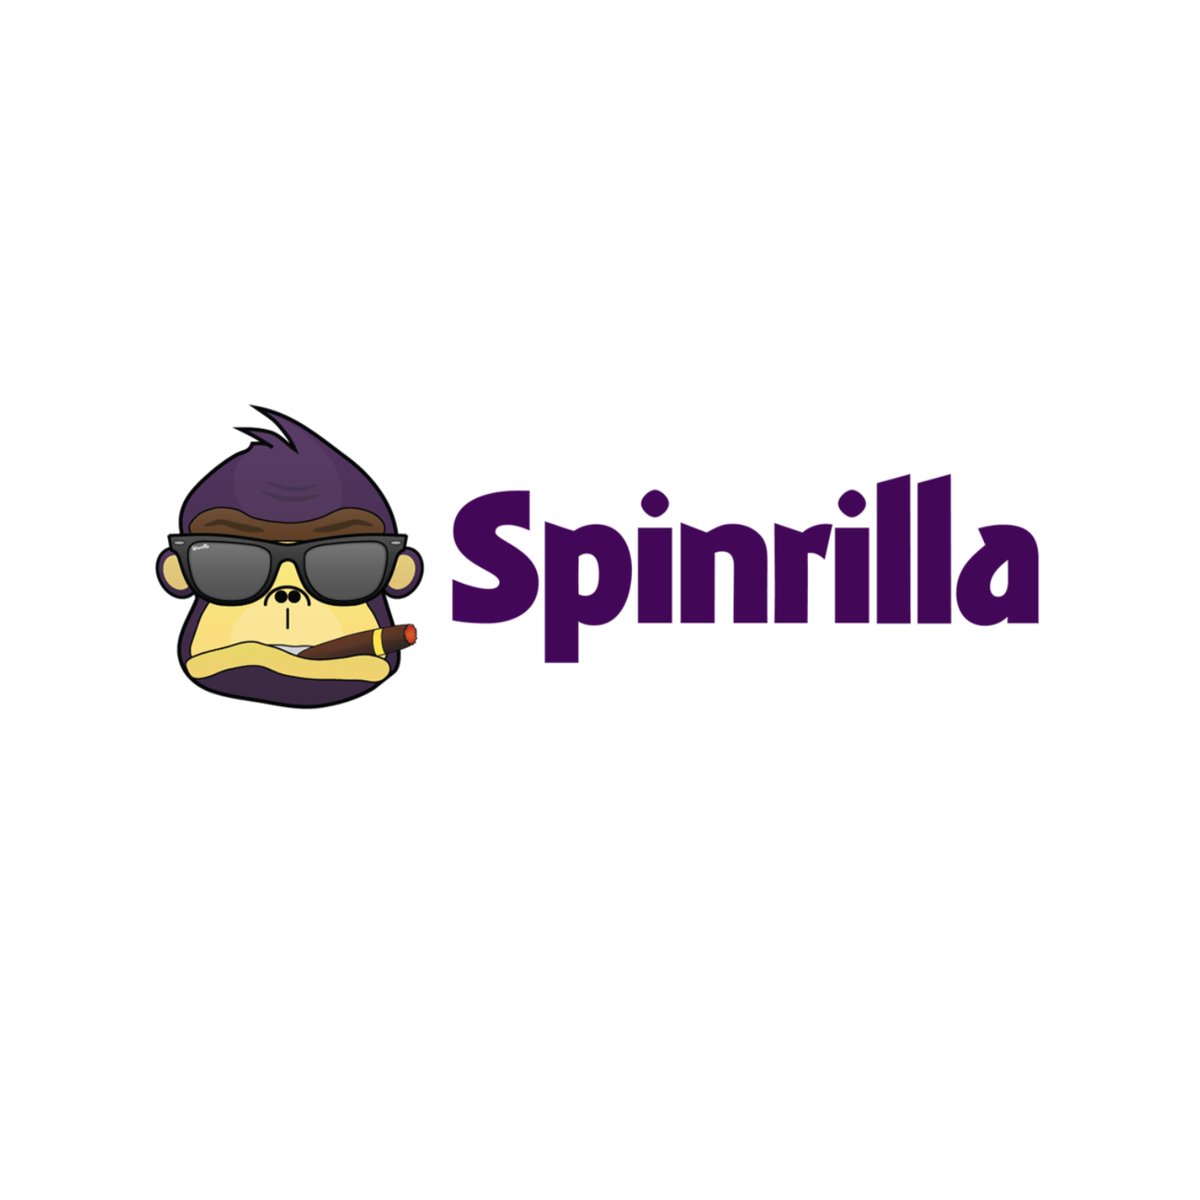 Mixtape hosting platform Spinrilla has been ordered to shut down and pay $50 million for copyright infringement